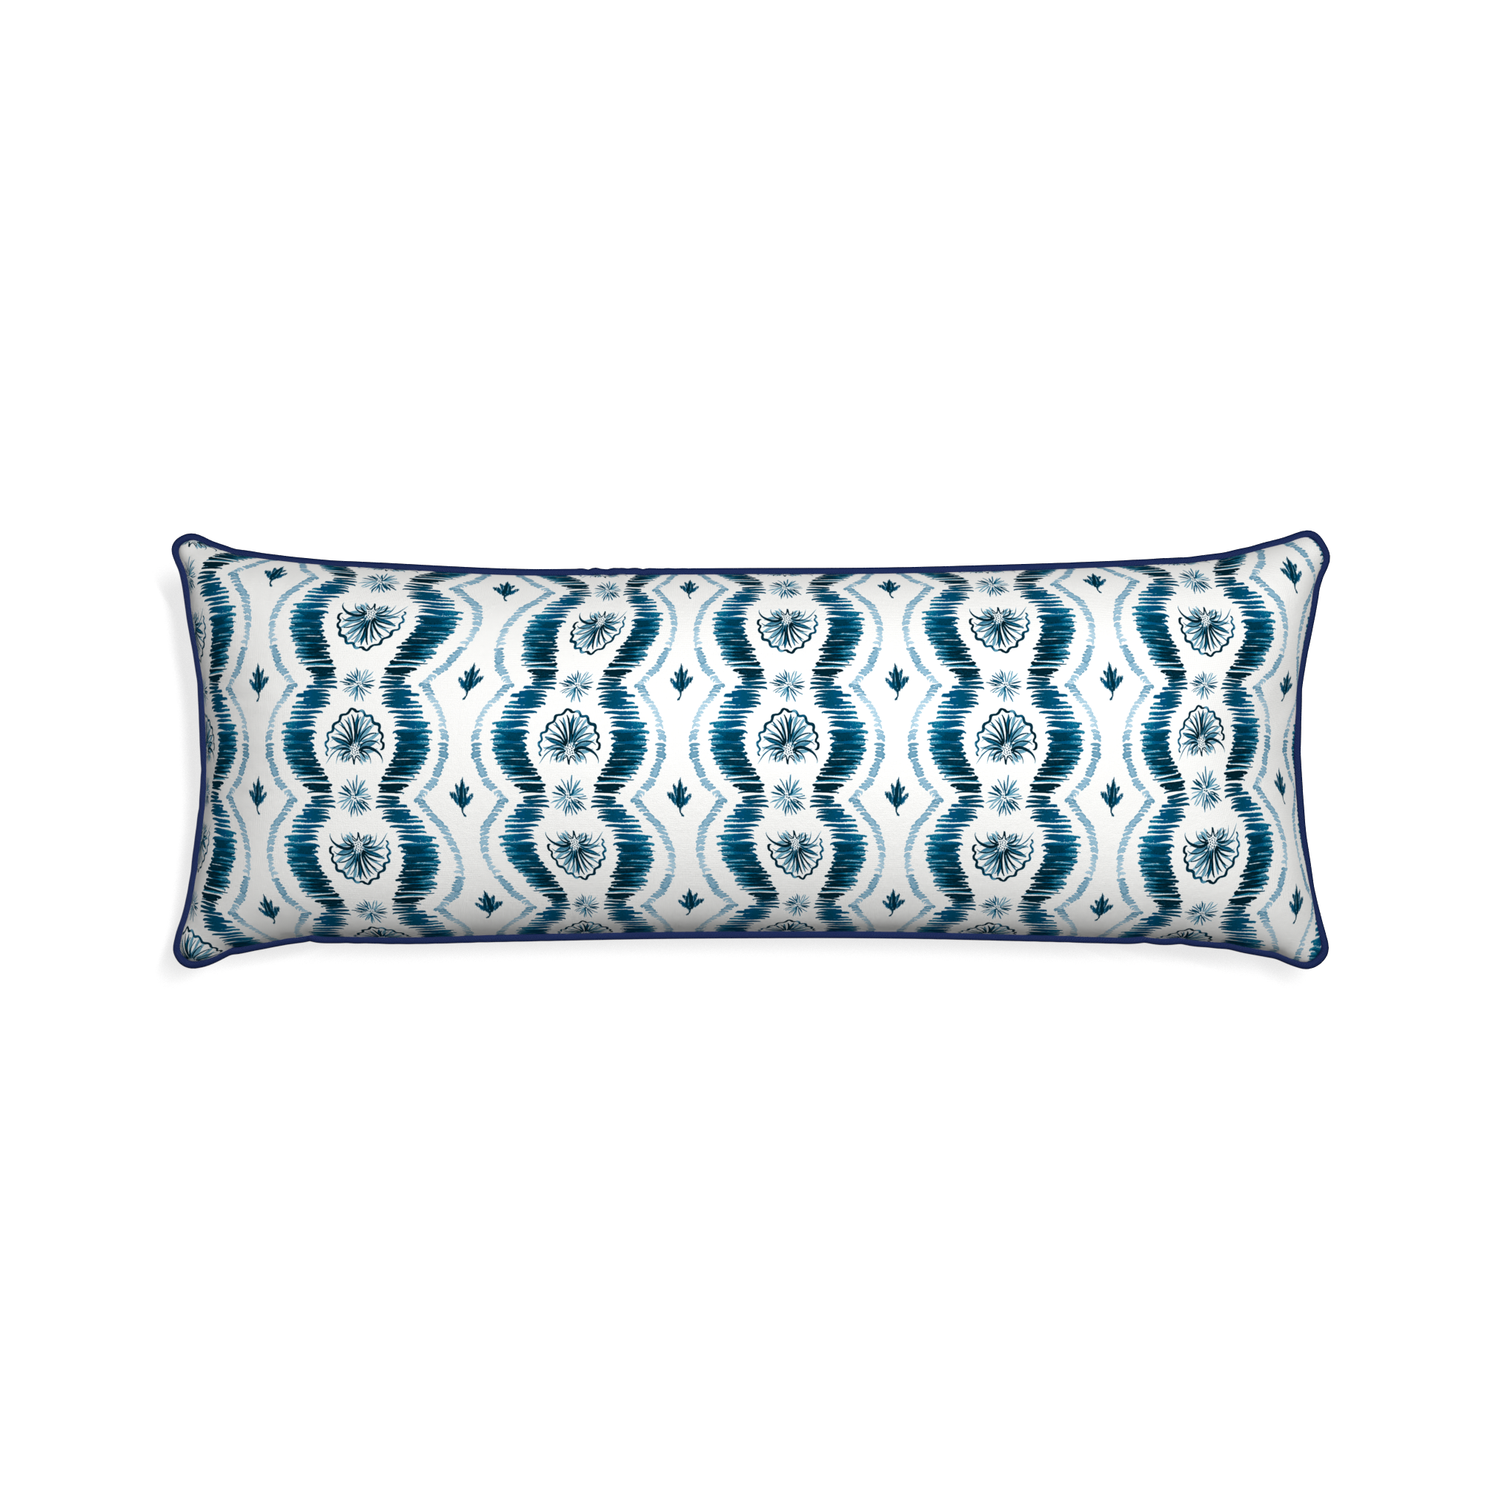 Xl-lumbar alice custom blue ikatpillow with midnight piping on white background